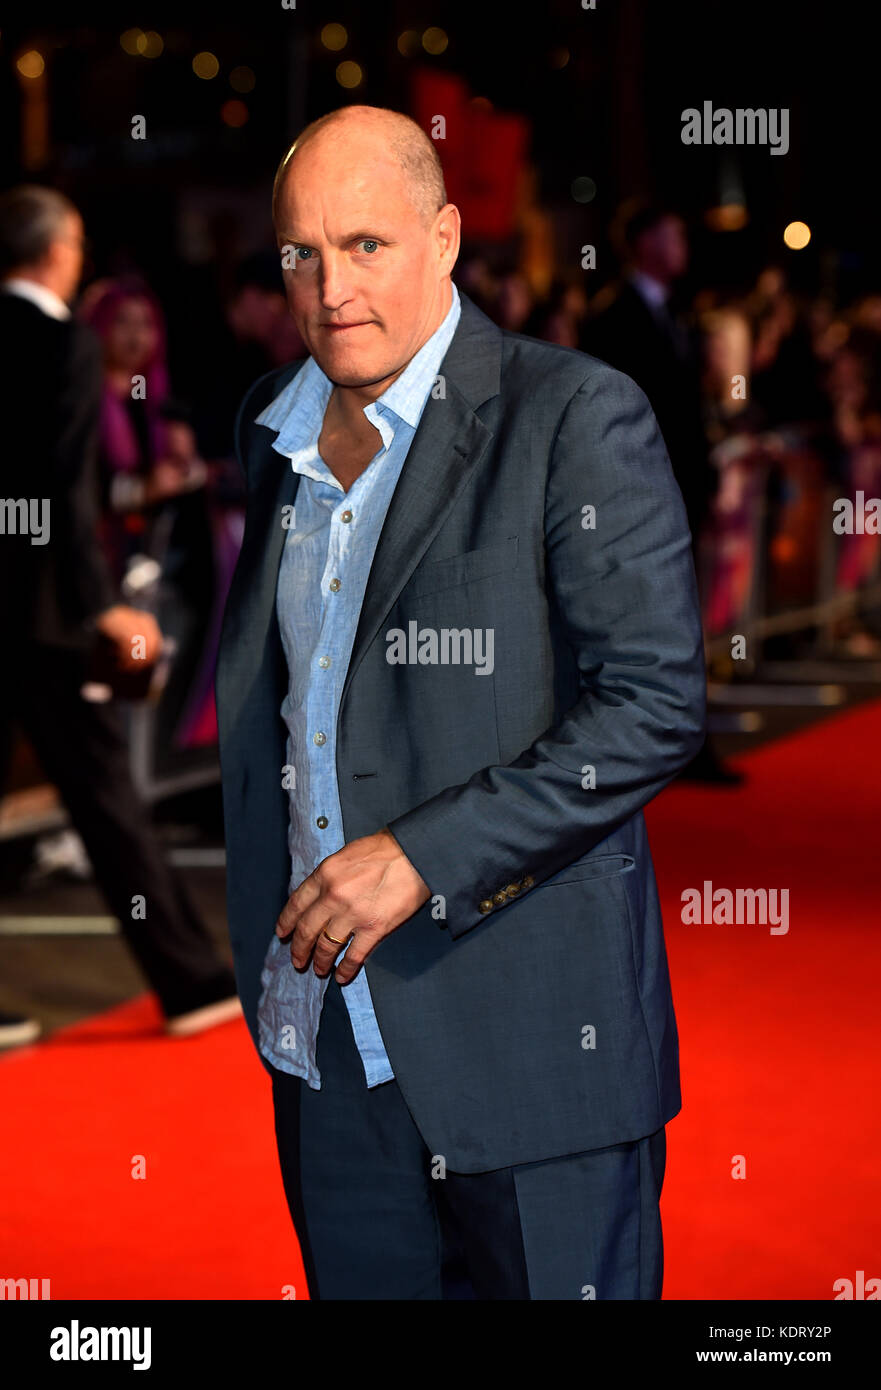 Woody Harrelson attending the premiere of Three Billboards Outside Ebbing, Missouri at the closing gala of the BFI London Film Festival, at the Odeon Leicester Square, London. Stock Photo